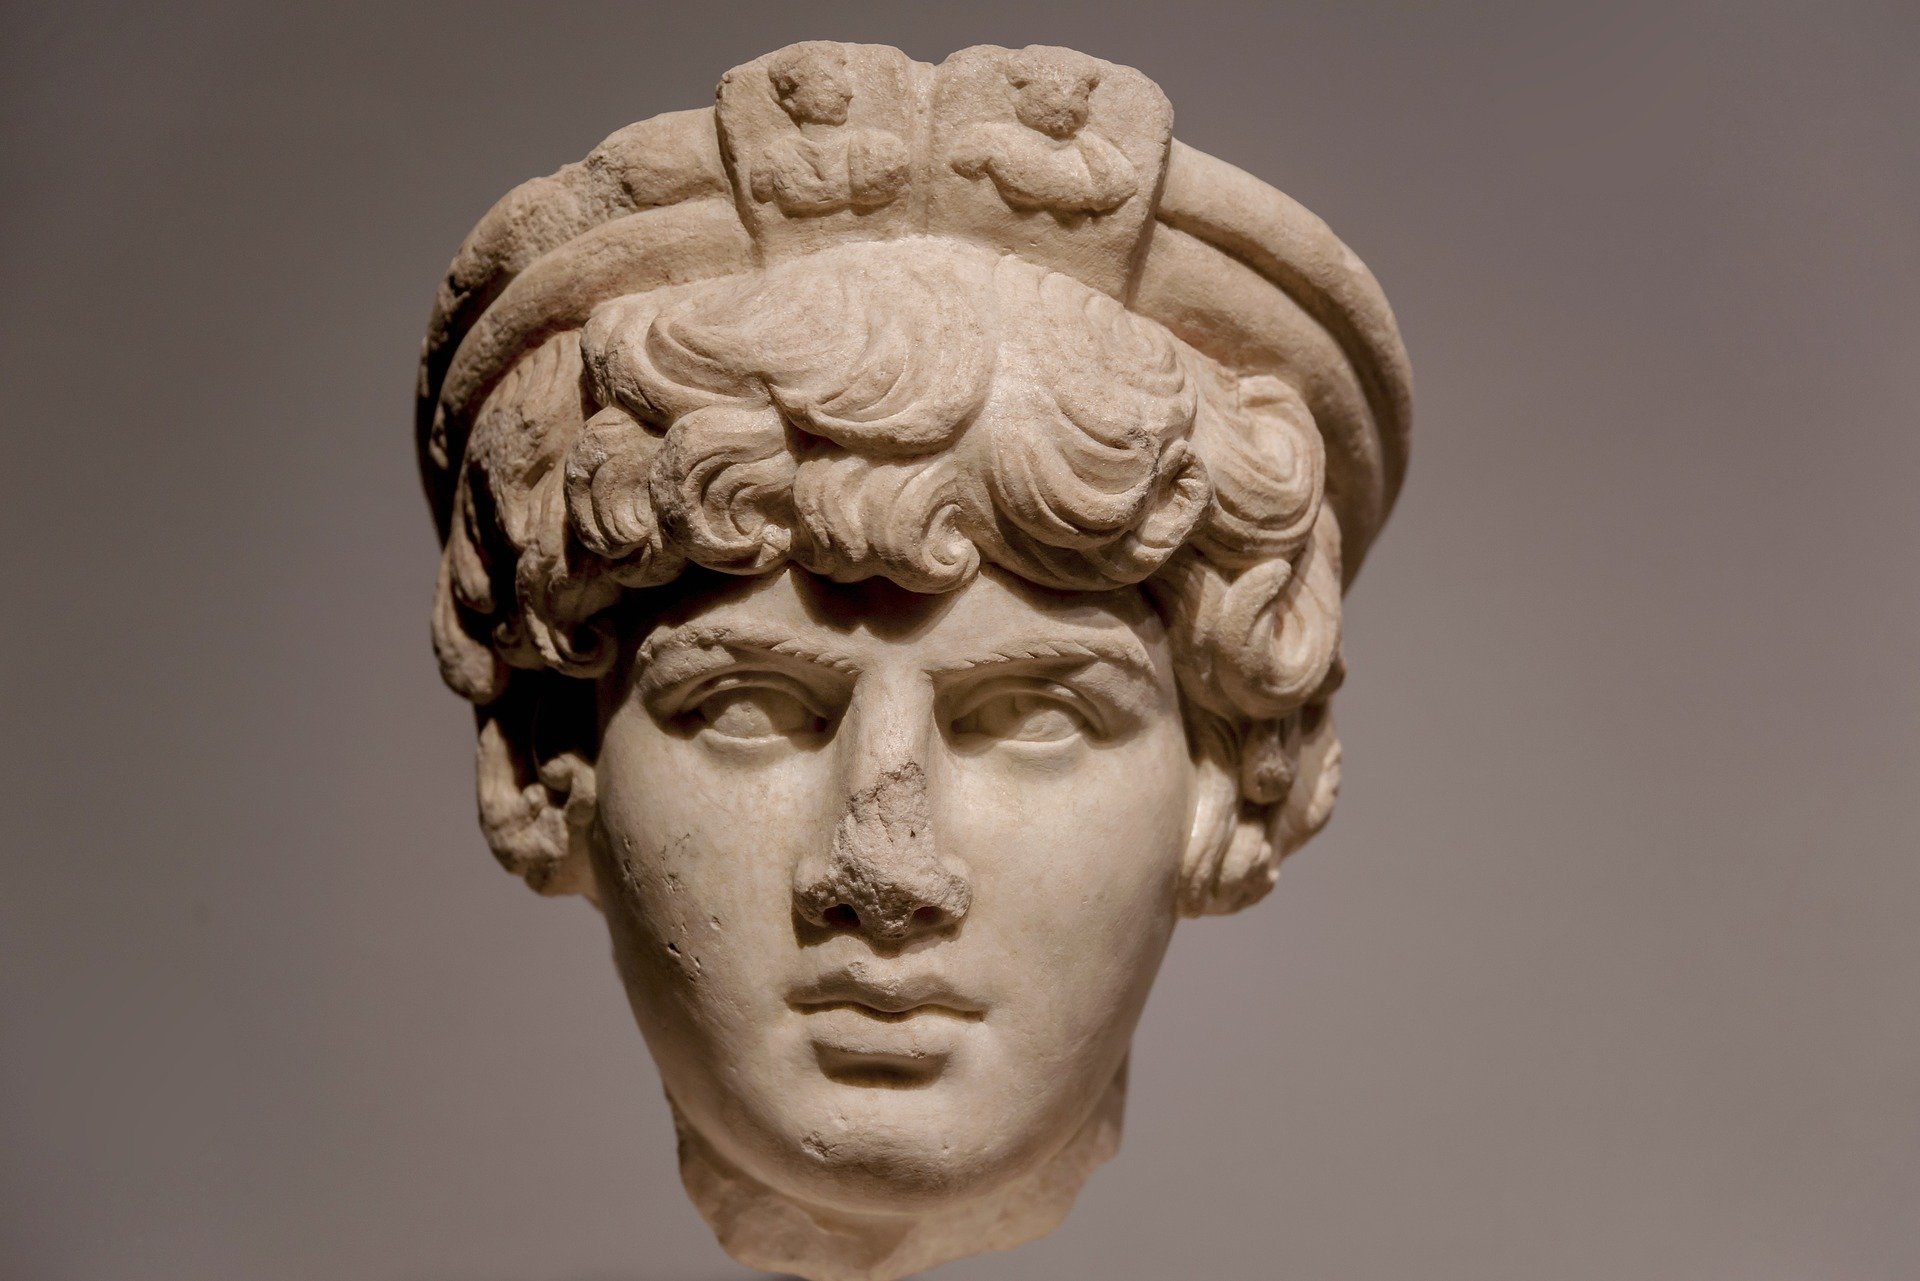 The head of an ancient statue.